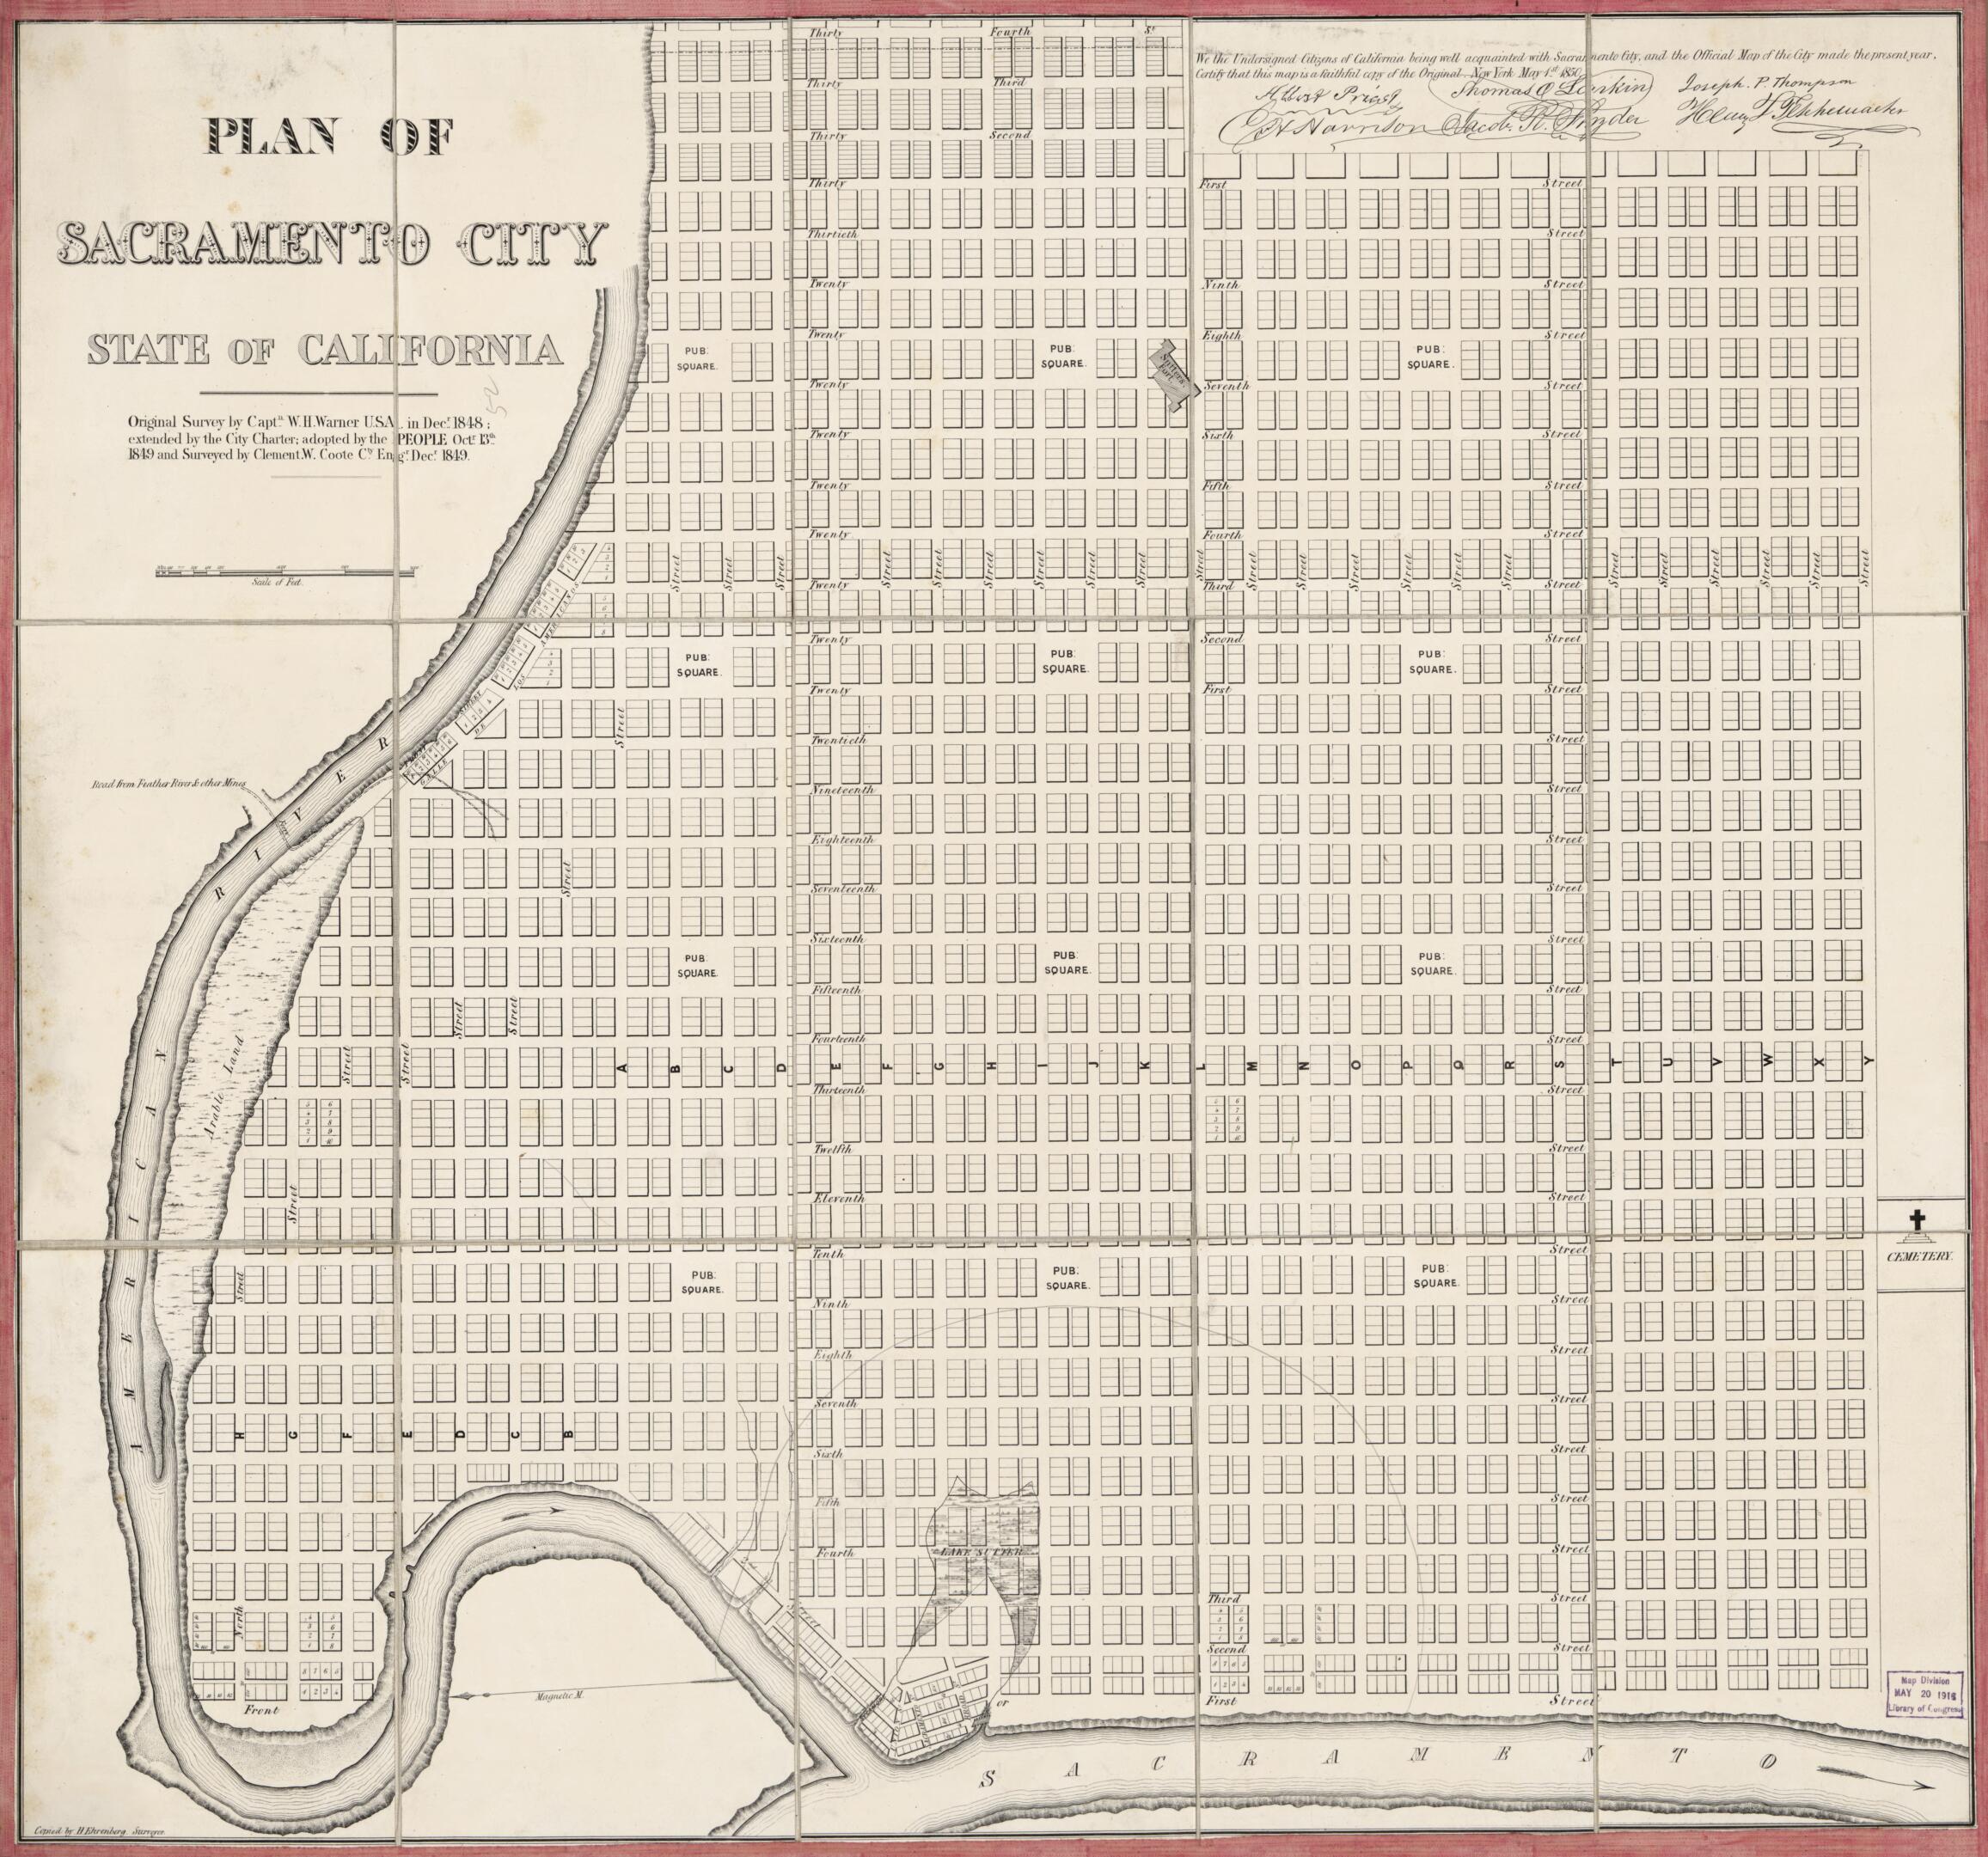 This old map of Plan of Sacramento City, State of California from 1848 was created by Millard Fillmore,  W. Endicott &amp; Co, William Horace Warner in 1848